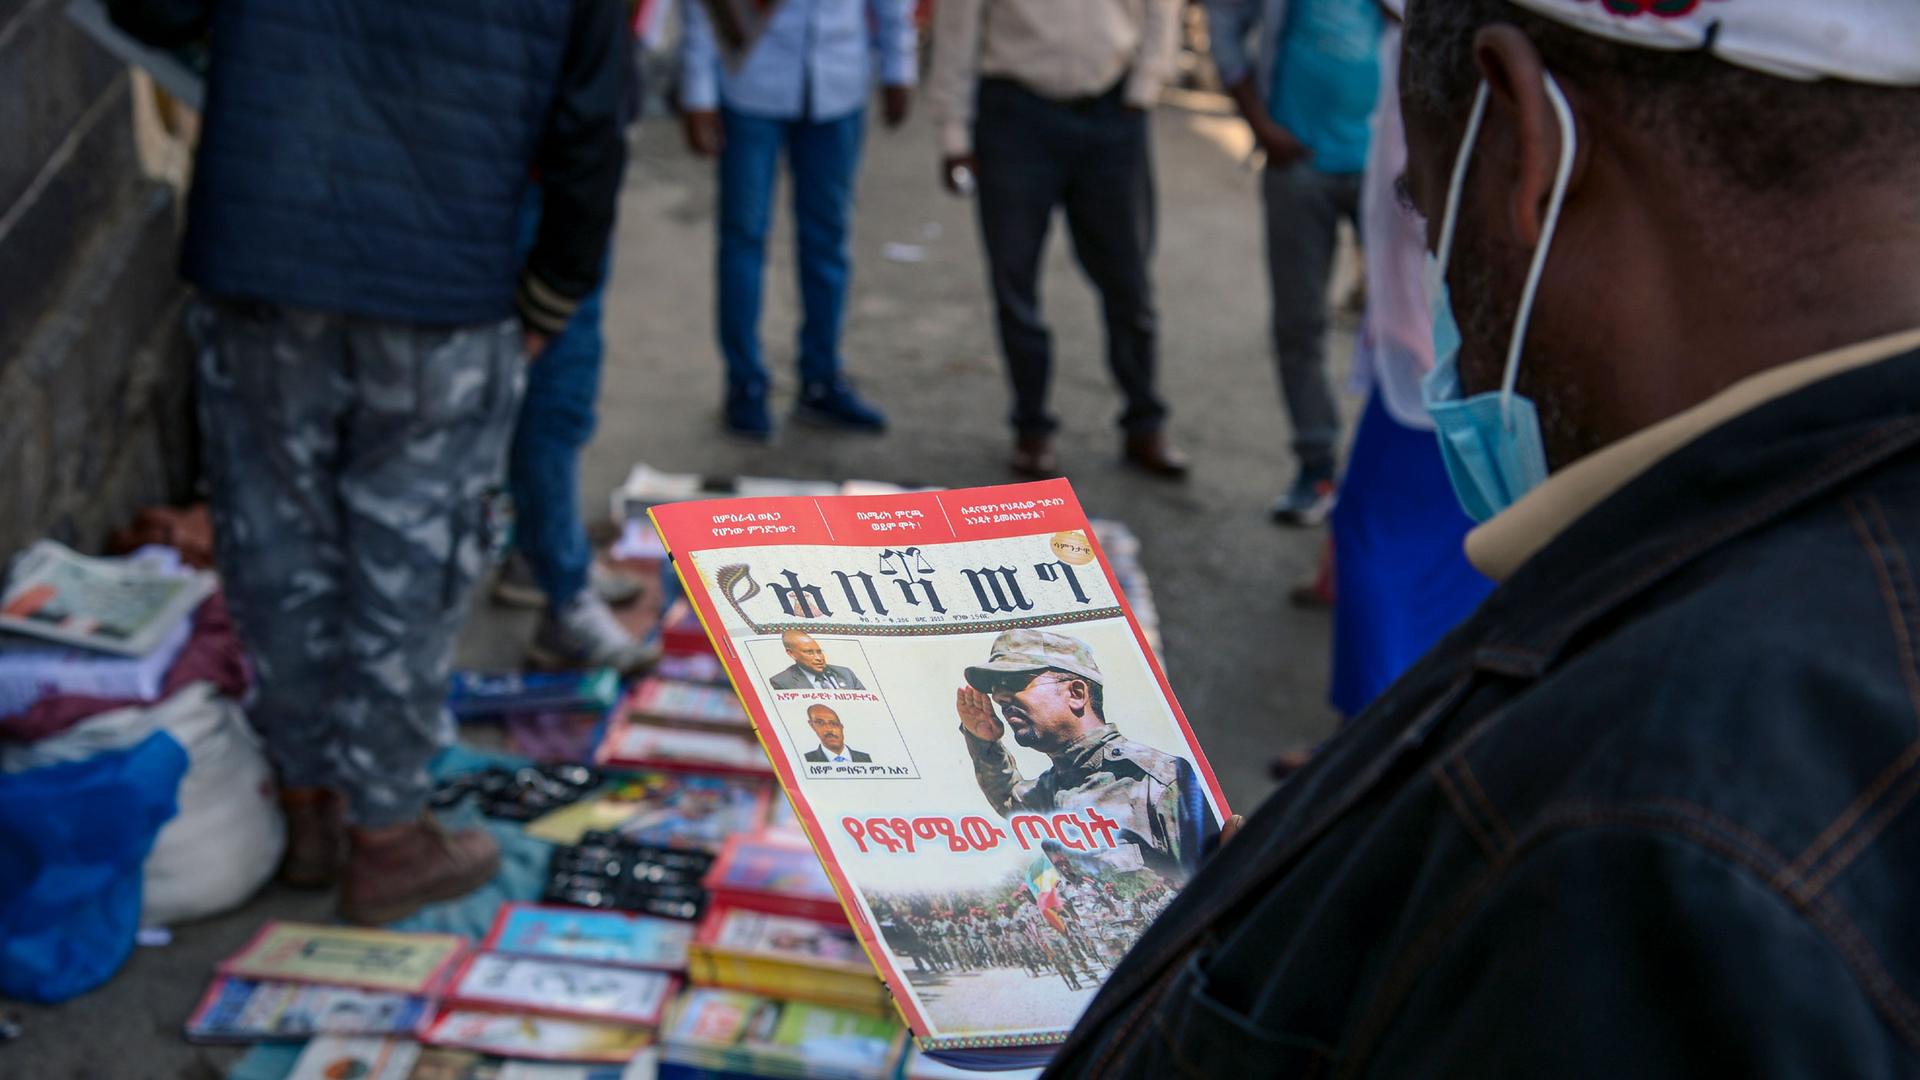 A man is shown wearing a face mask and holding a magazine with dozens of other magazines for sale and set on the ground.